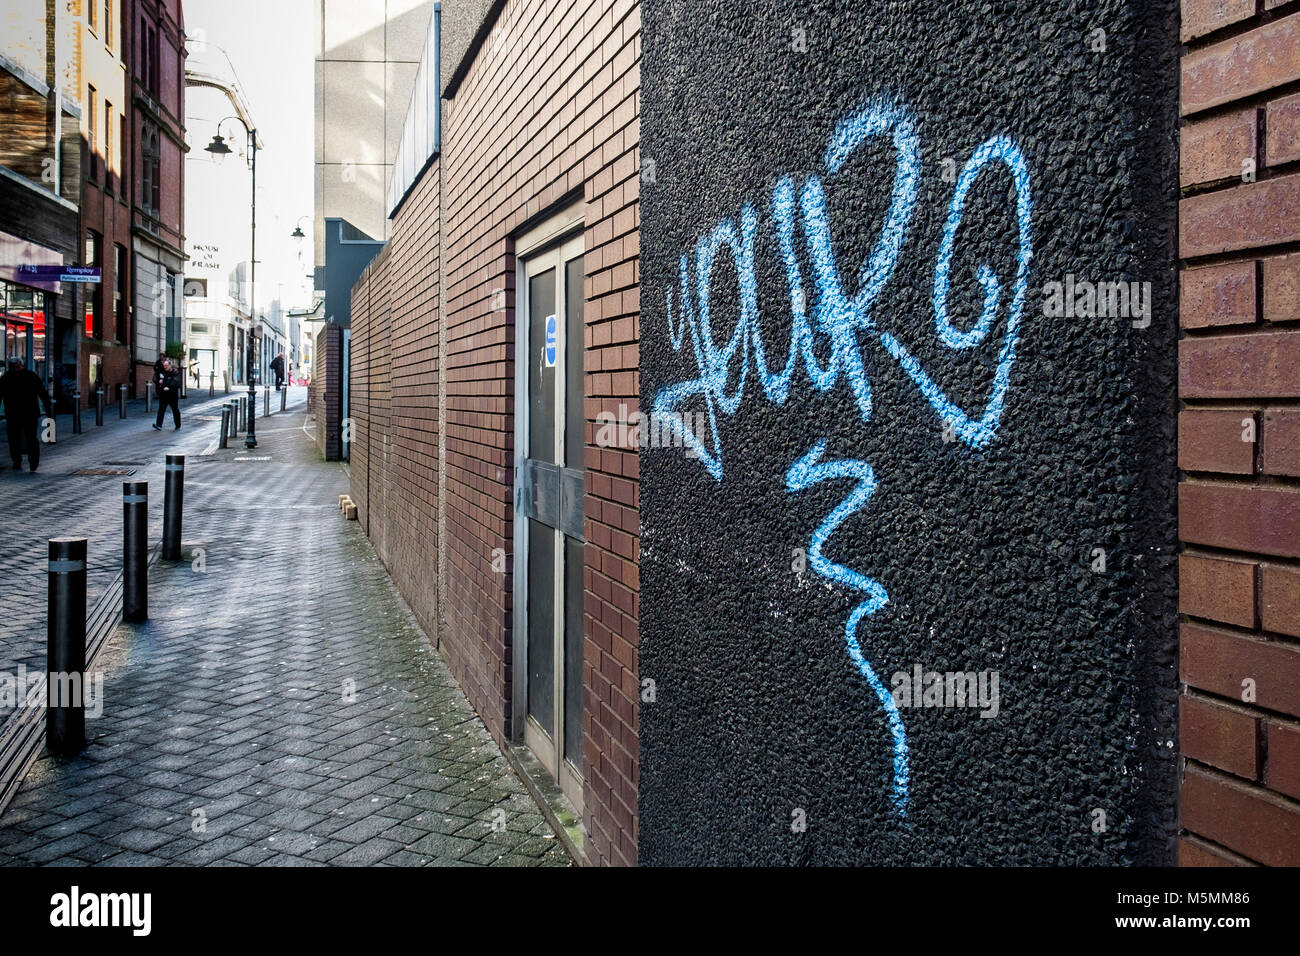 Graffiti tag sprayed on a wall in Cardiff City centre Wales. Stock Photo